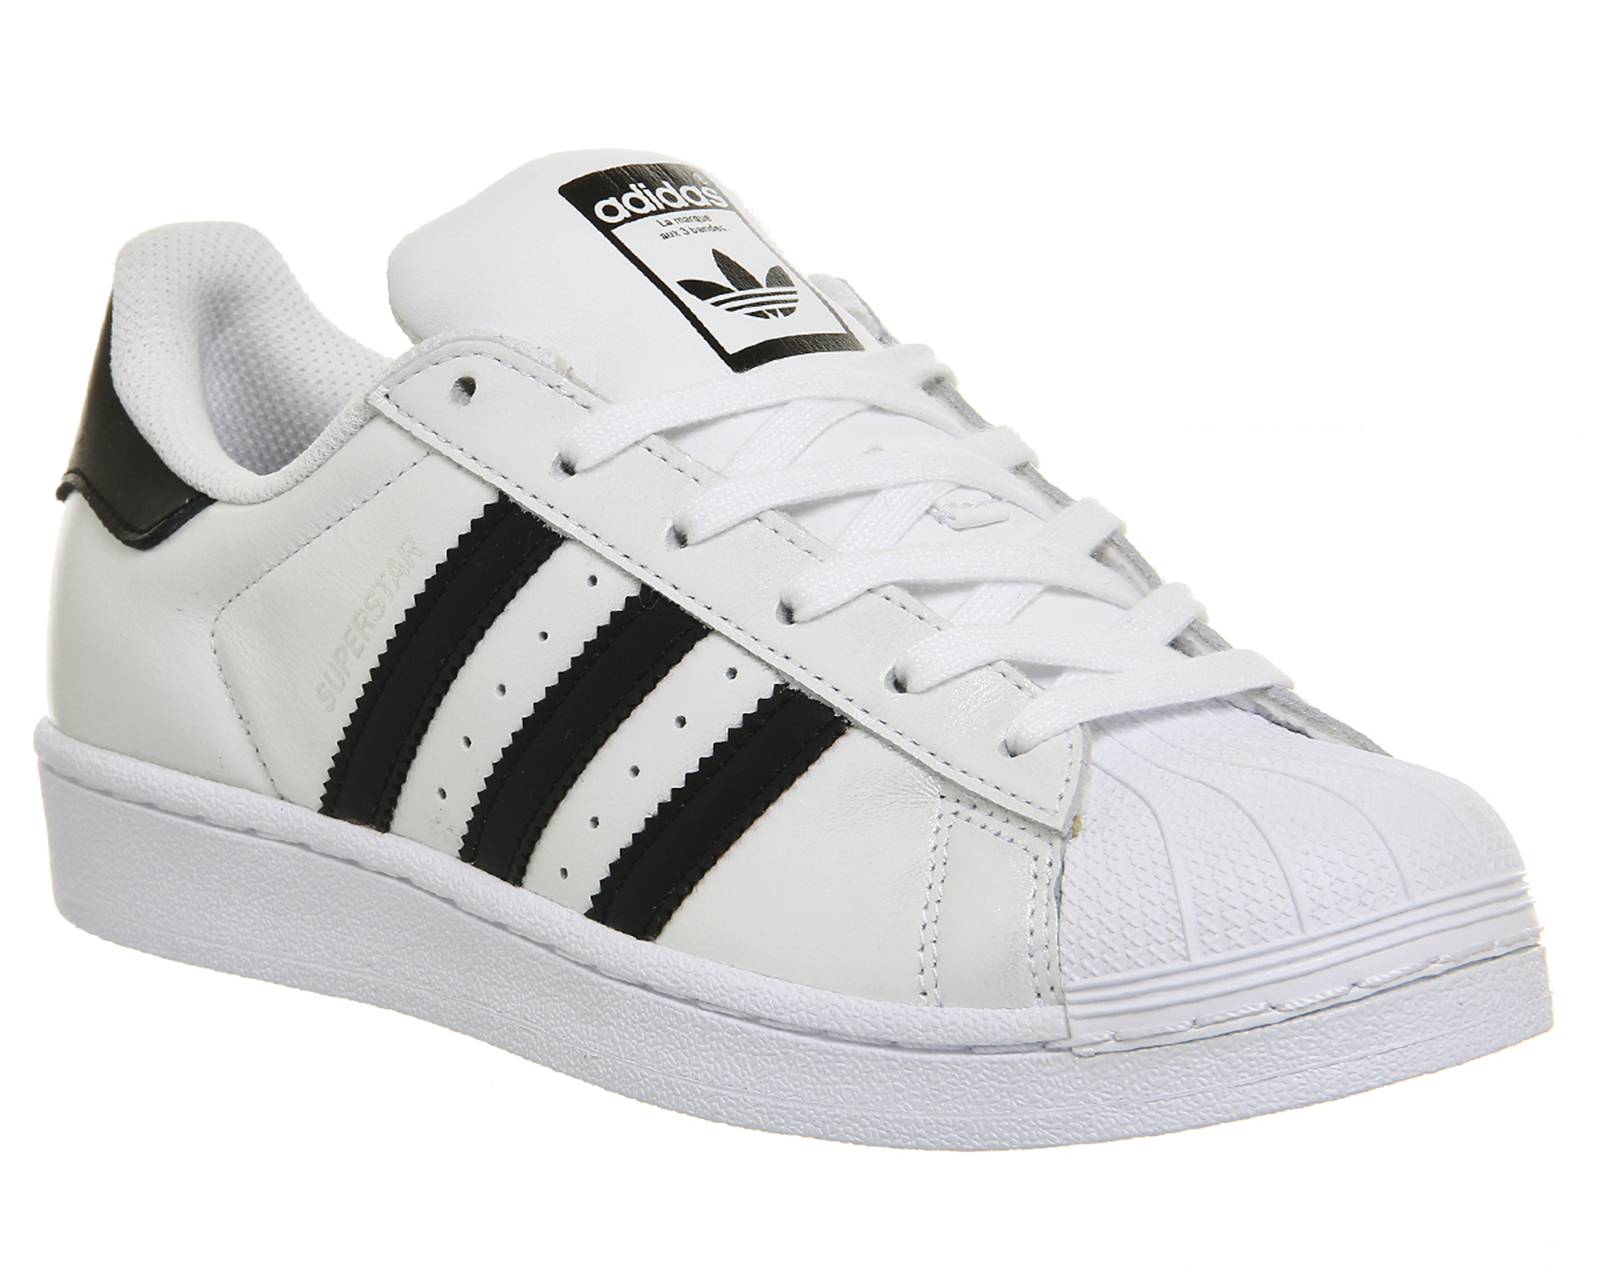 adidas Superstar 1 Pearlized White Black - Women's Trainers